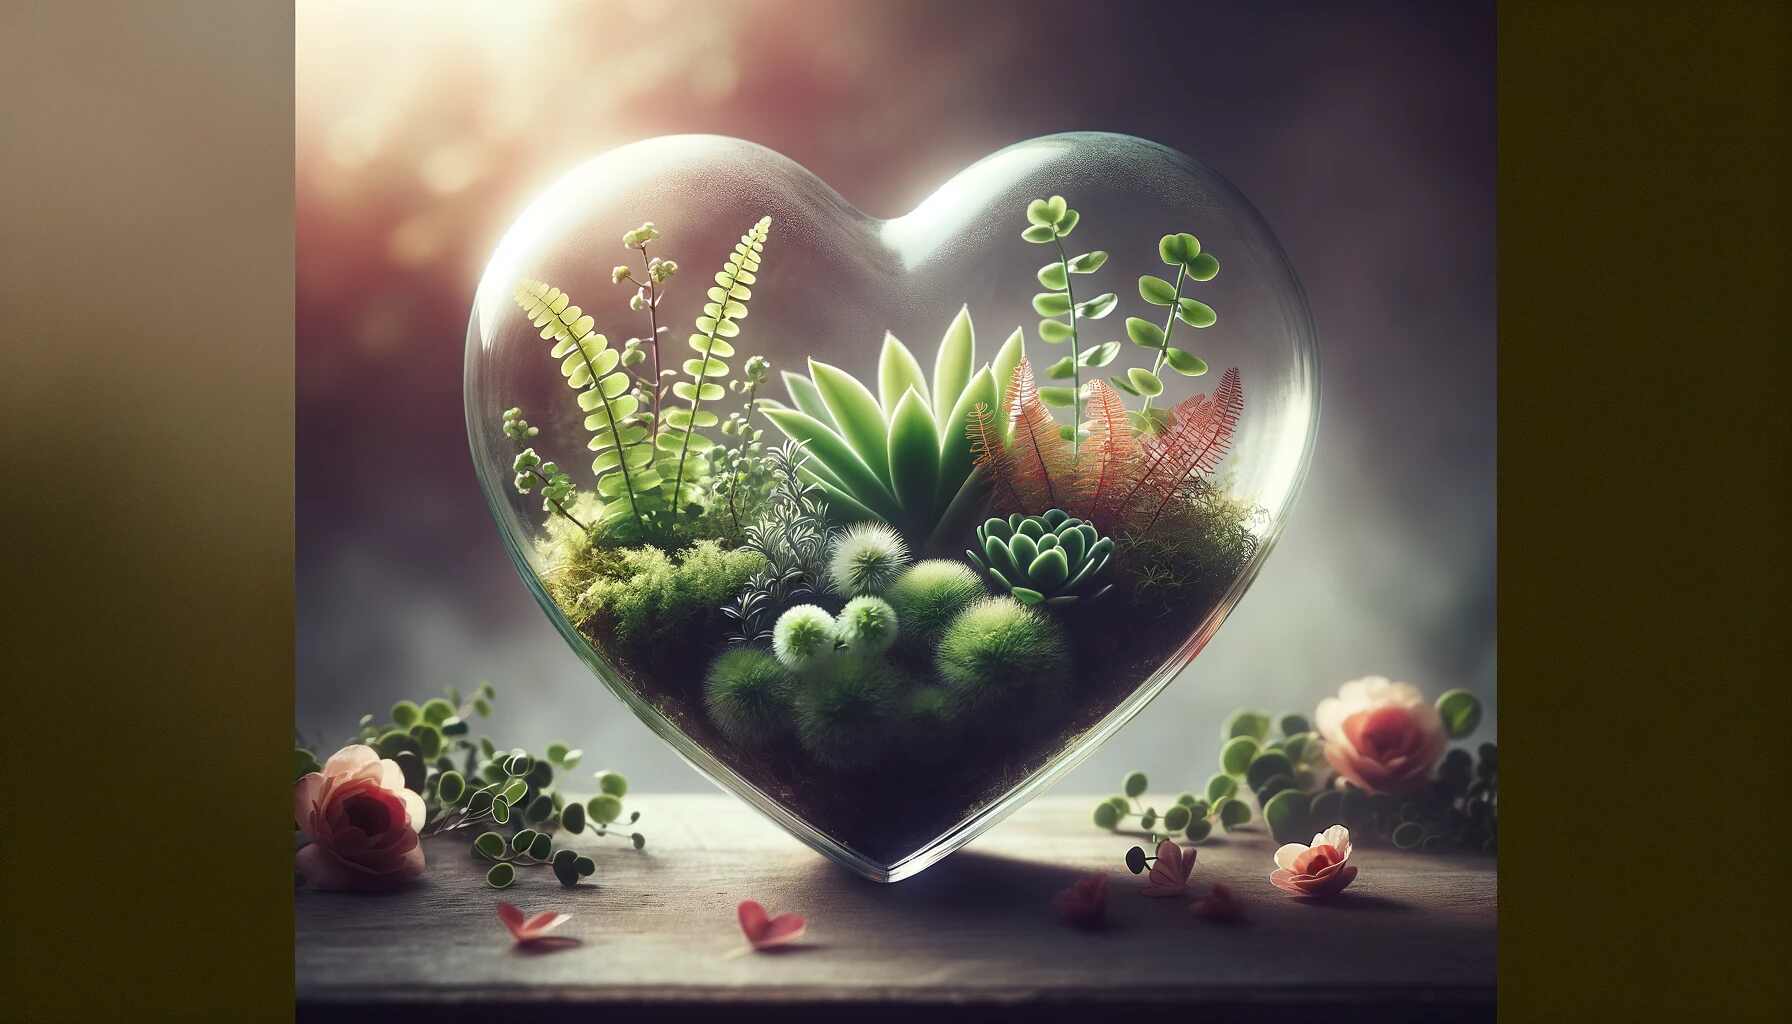 A heart-shaped glass terrarium filled with lush tiny plants, including ferns, mosses, and fittonia, symbolizing love and care for Valentine's Day.